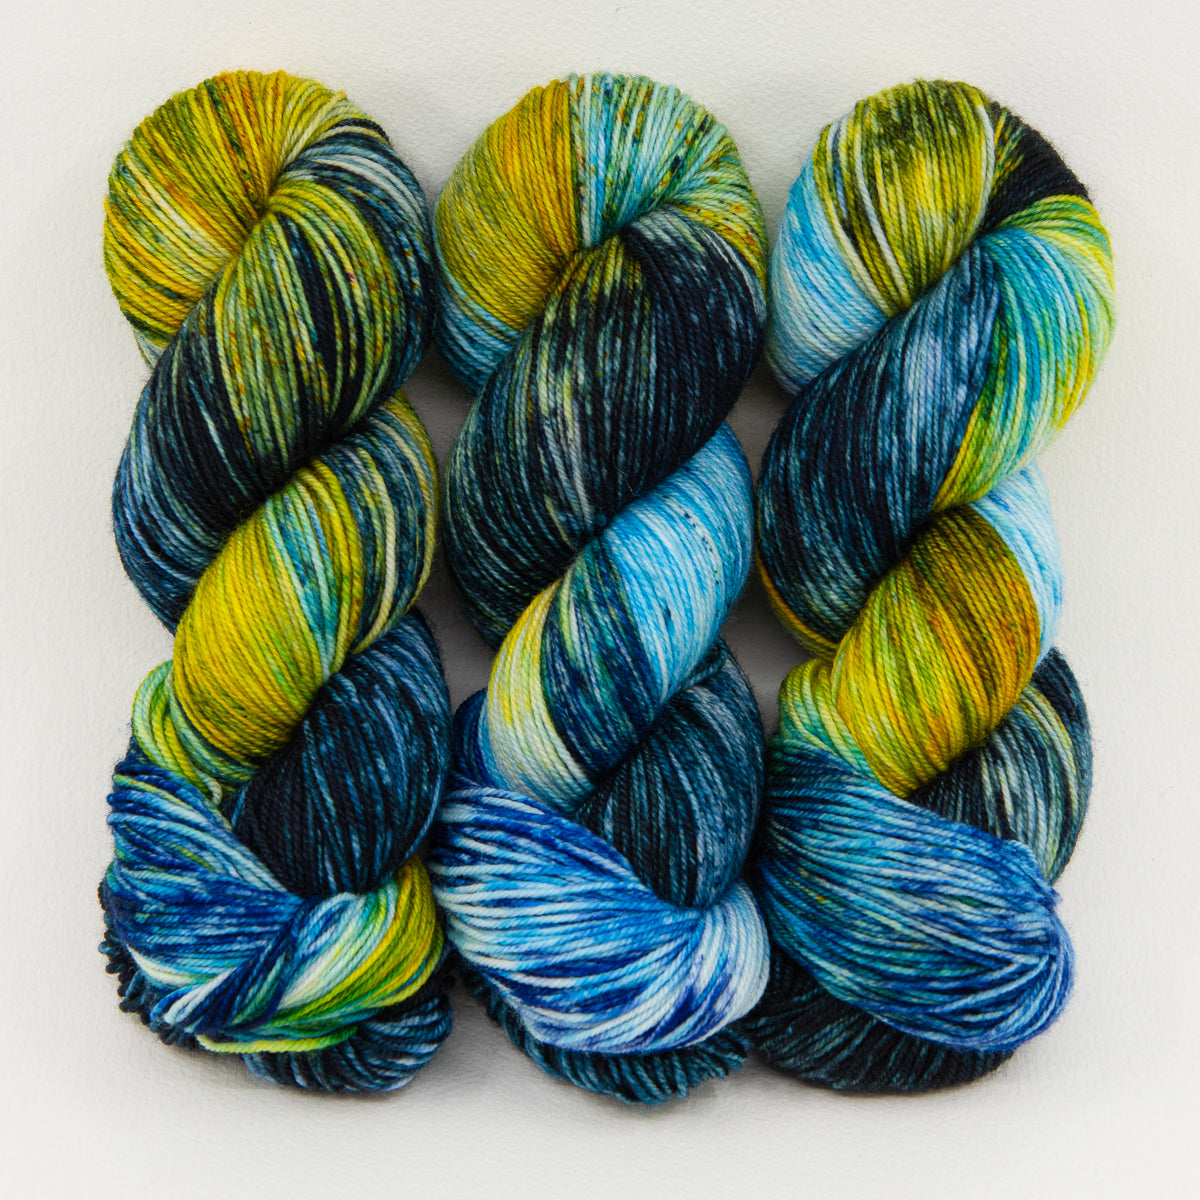 Starry Night - Van Gogh - Revival Worsted - Dyed Stock